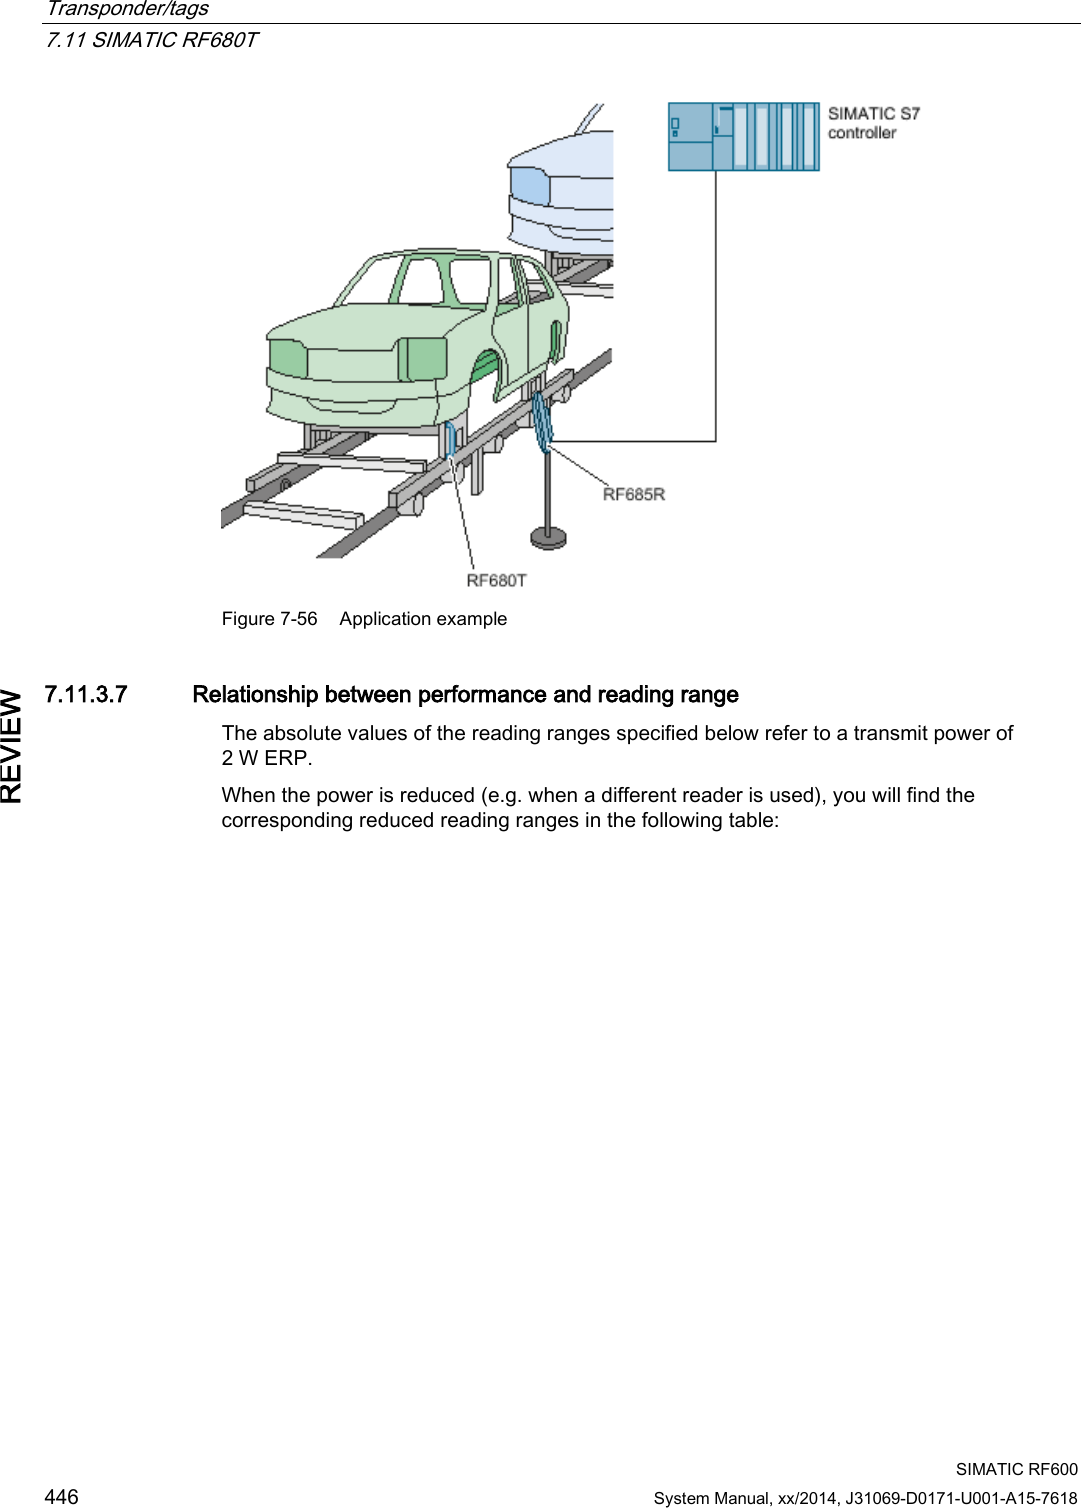 Transponder/tags   7.11 SIMATIC RF680T  SIMATIC RF600 446 System Manual, xx/2014, J31069-D0171-U001-A15-7618 REVIEW  Figure 7-56 Application example 7.11.3.7 Relationship between performance and reading range The absolute values of the reading ranges specified below refer to a transmit power of 2 W ERP. When the power is reduced (e.g. when a different reader is used), you will find the corresponding reduced reading ranges in the following table: 